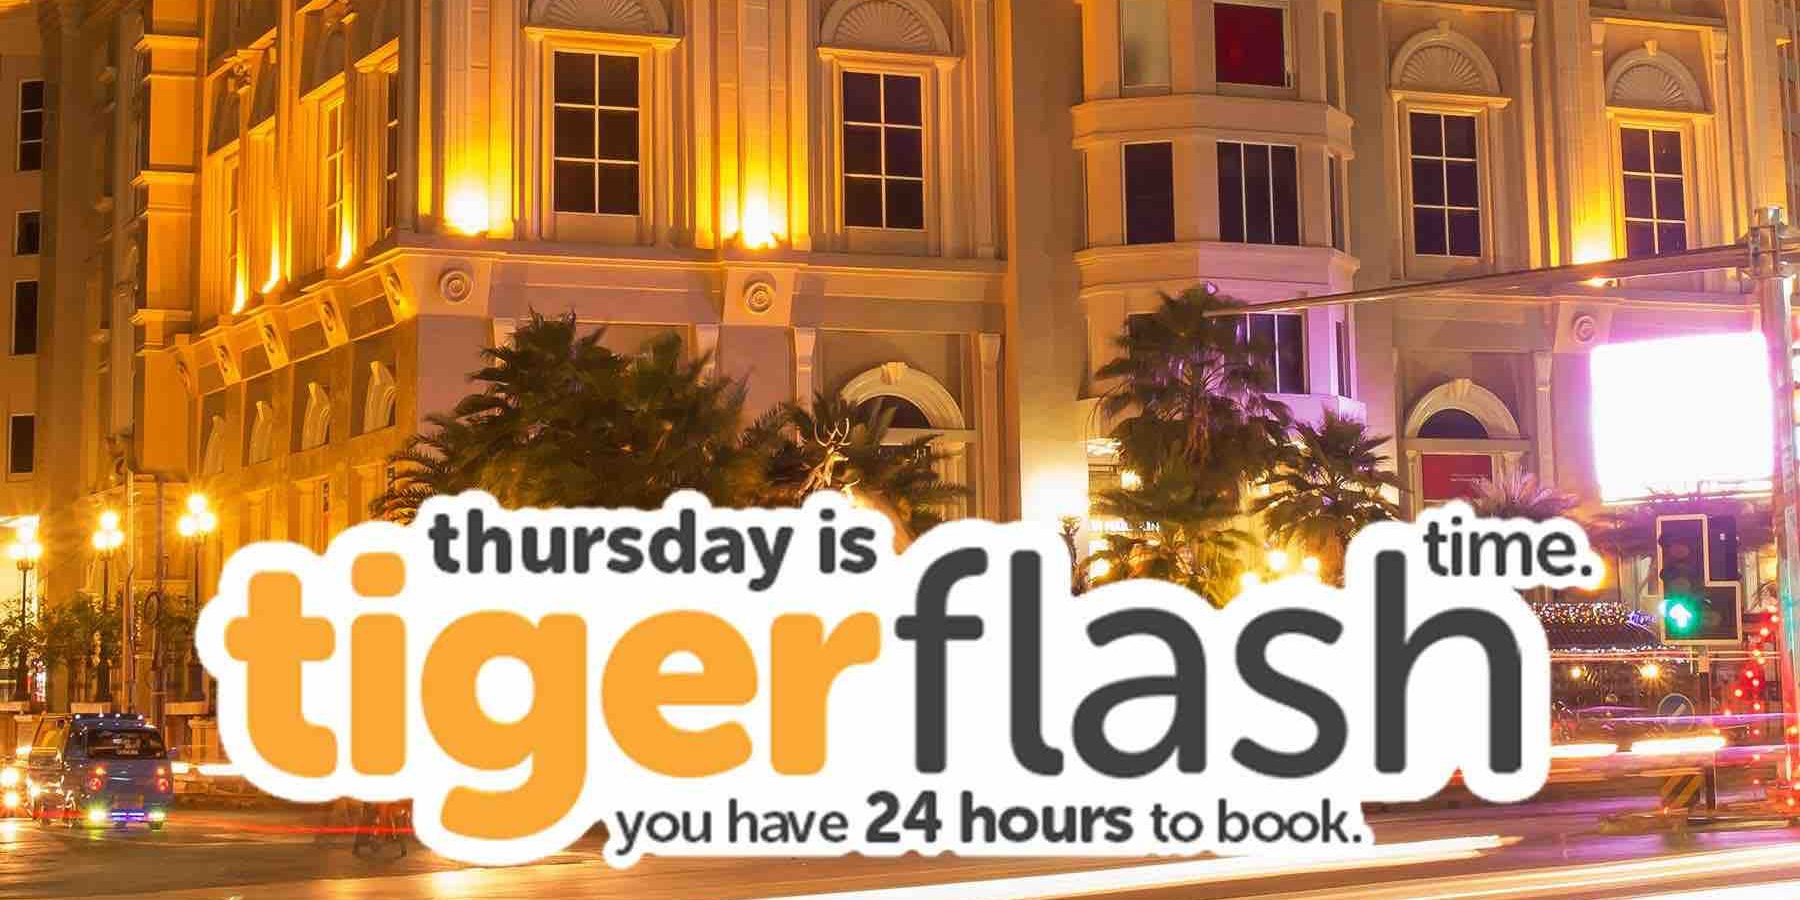 Tigerair Singapore Thursday Flash Time Fly to Hat Yai From $69 Promotion ends 2 Jun 2017